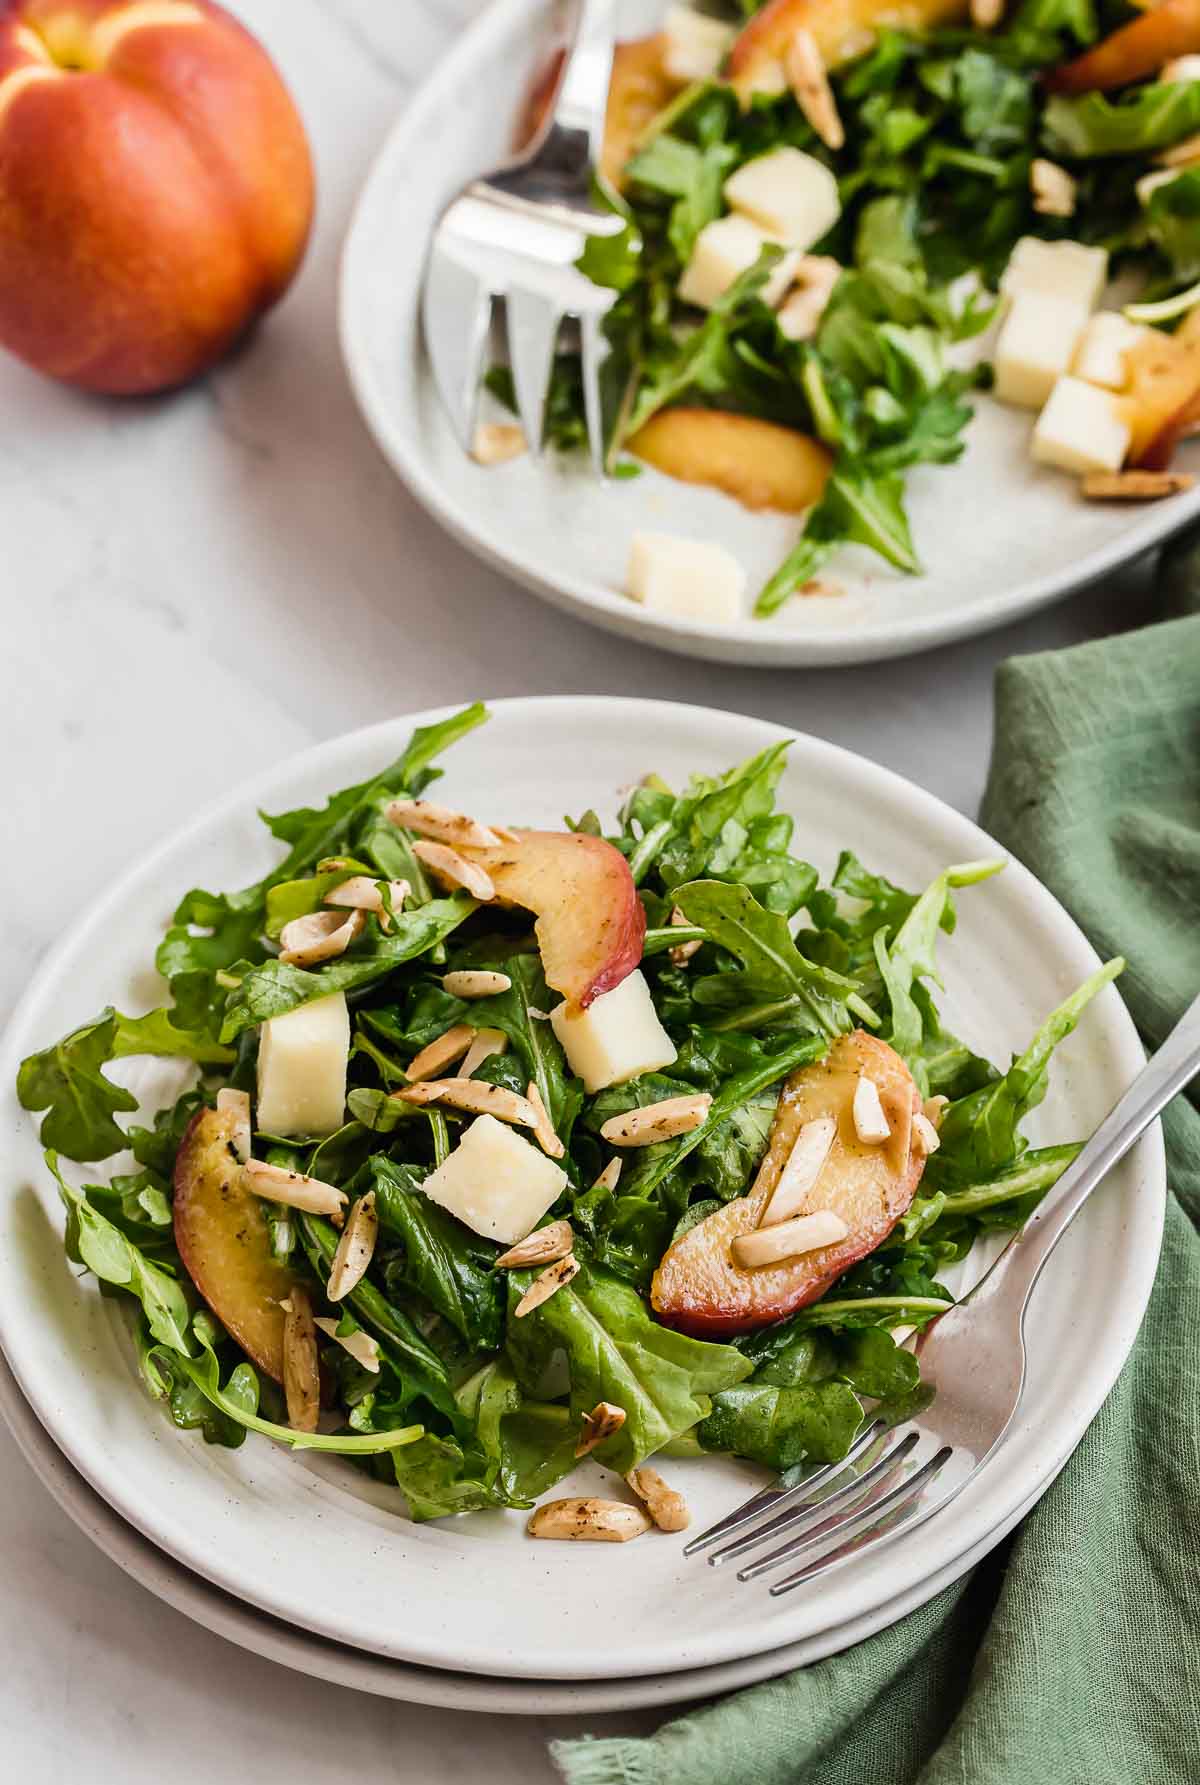 Two arugula salads on plates with nectarine in background.